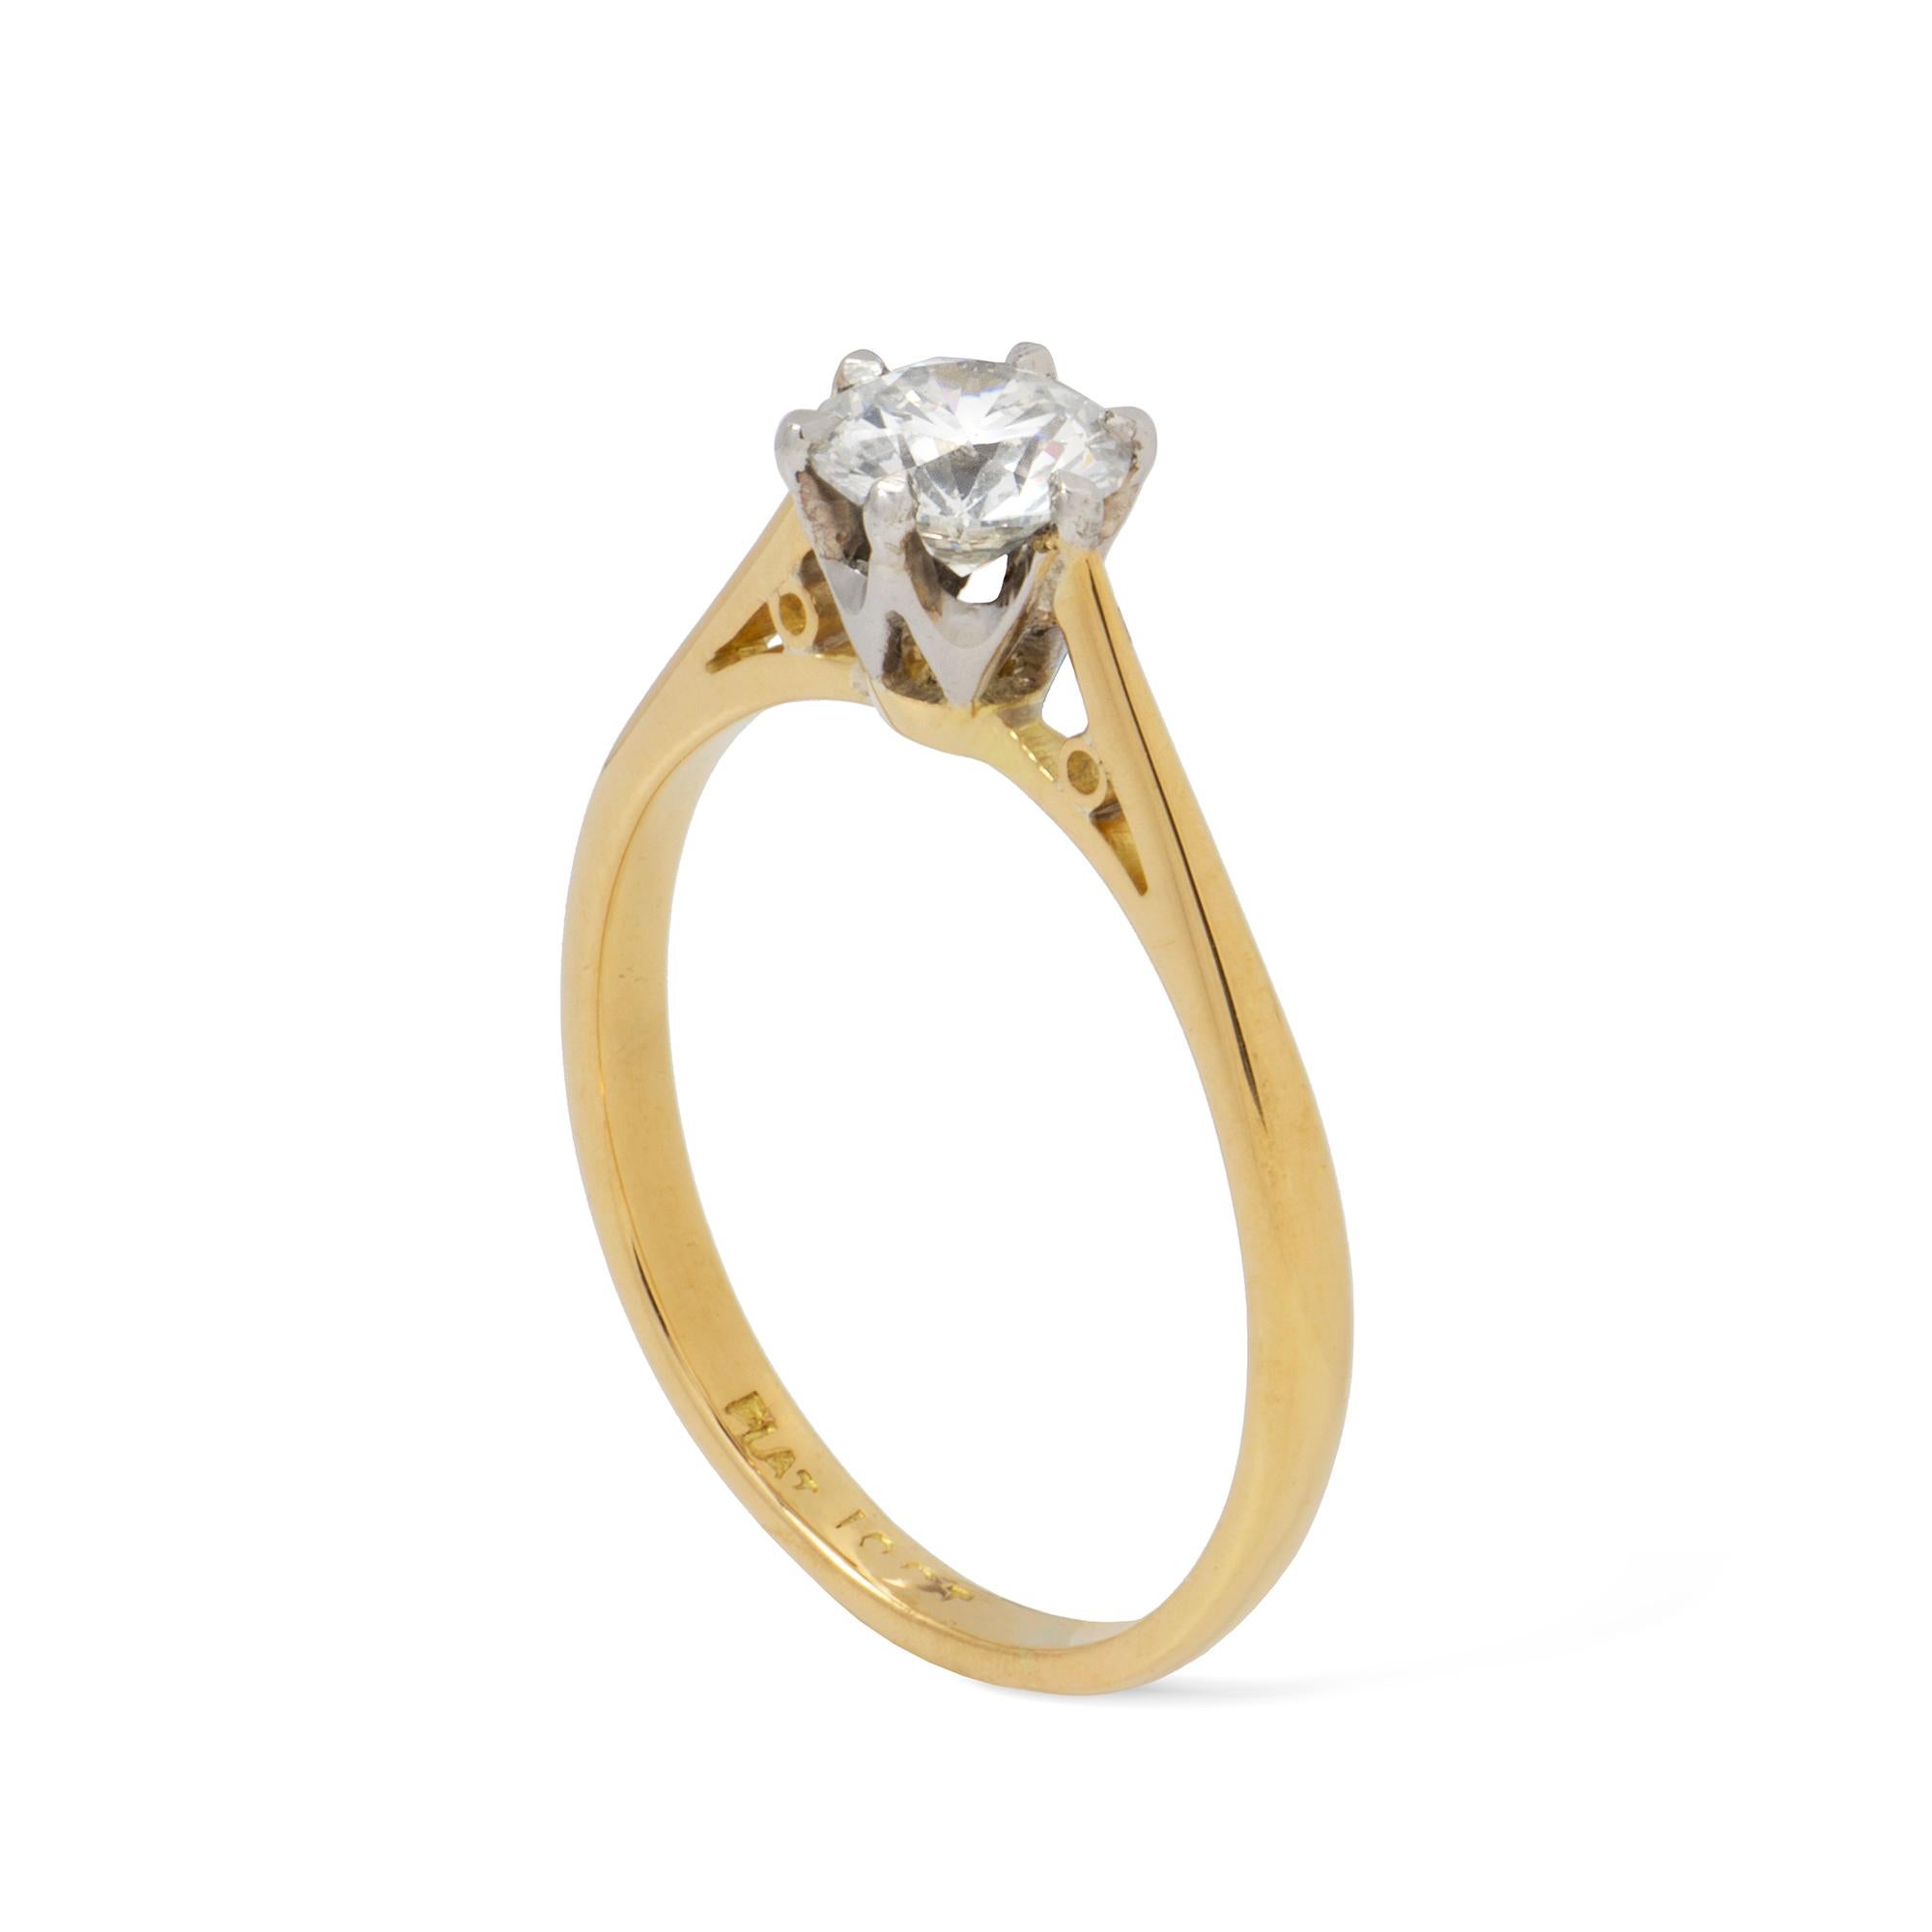 A single stone diamond ring, the round brilliant-cut diamond weighing 0.66 carats, claw-set to a platinum rex-design collet, to yellow gold mount, later hallmarked London 2019, bearing Bentley & Skinner sponsor mark, gross weight 2.4 grams. 

This